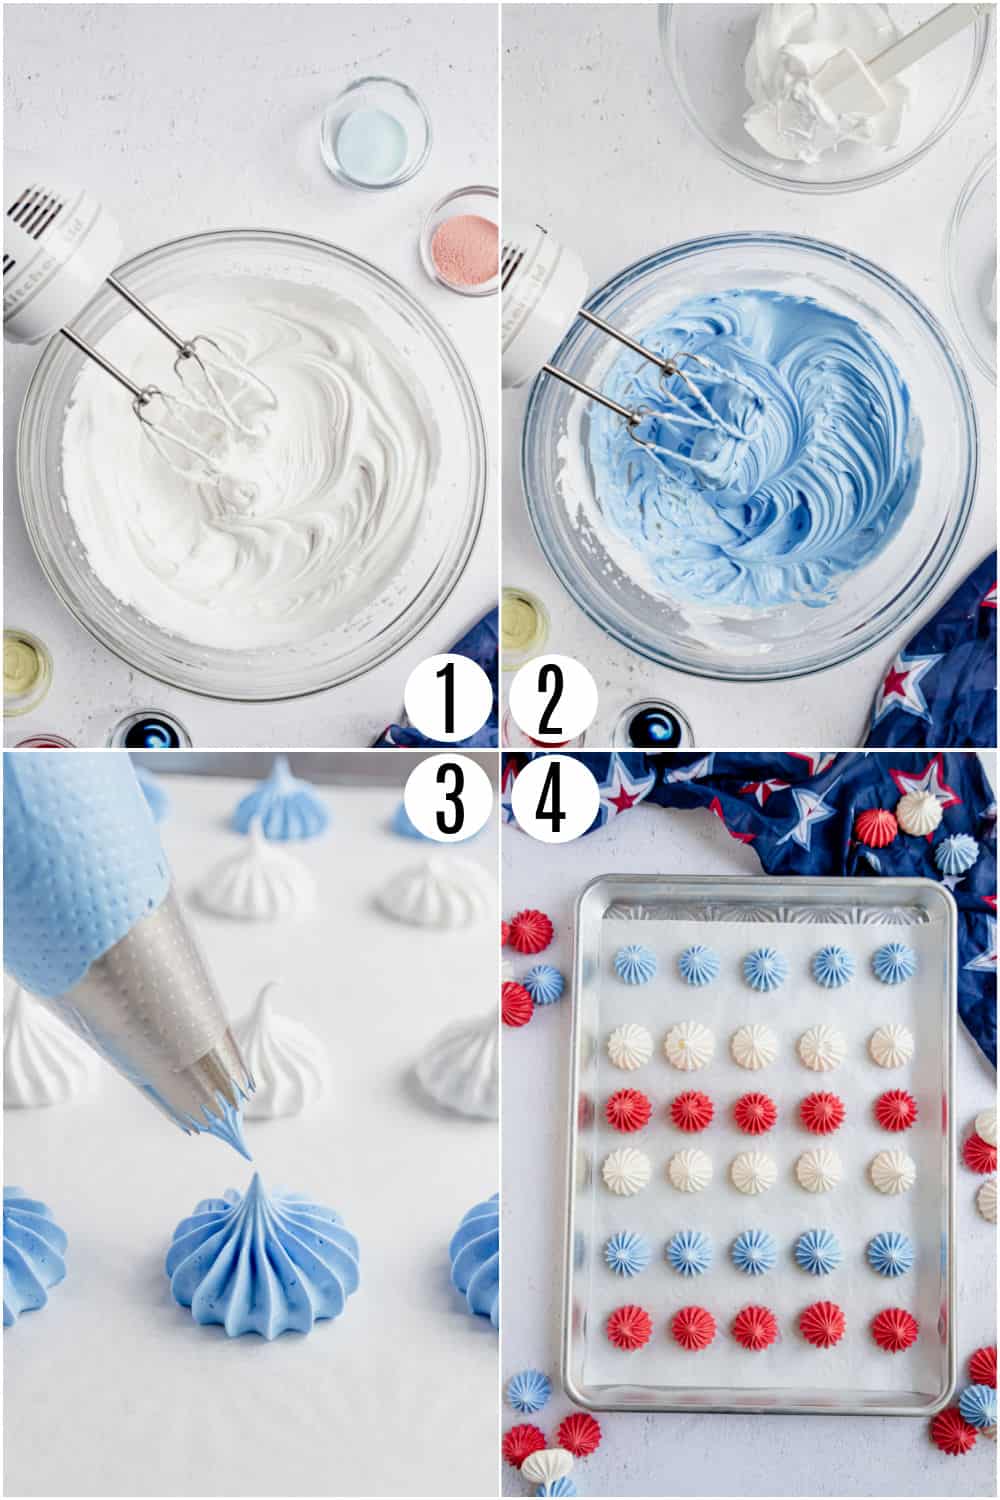 Step by step photos showing how to make red white and blue meringue cookies.